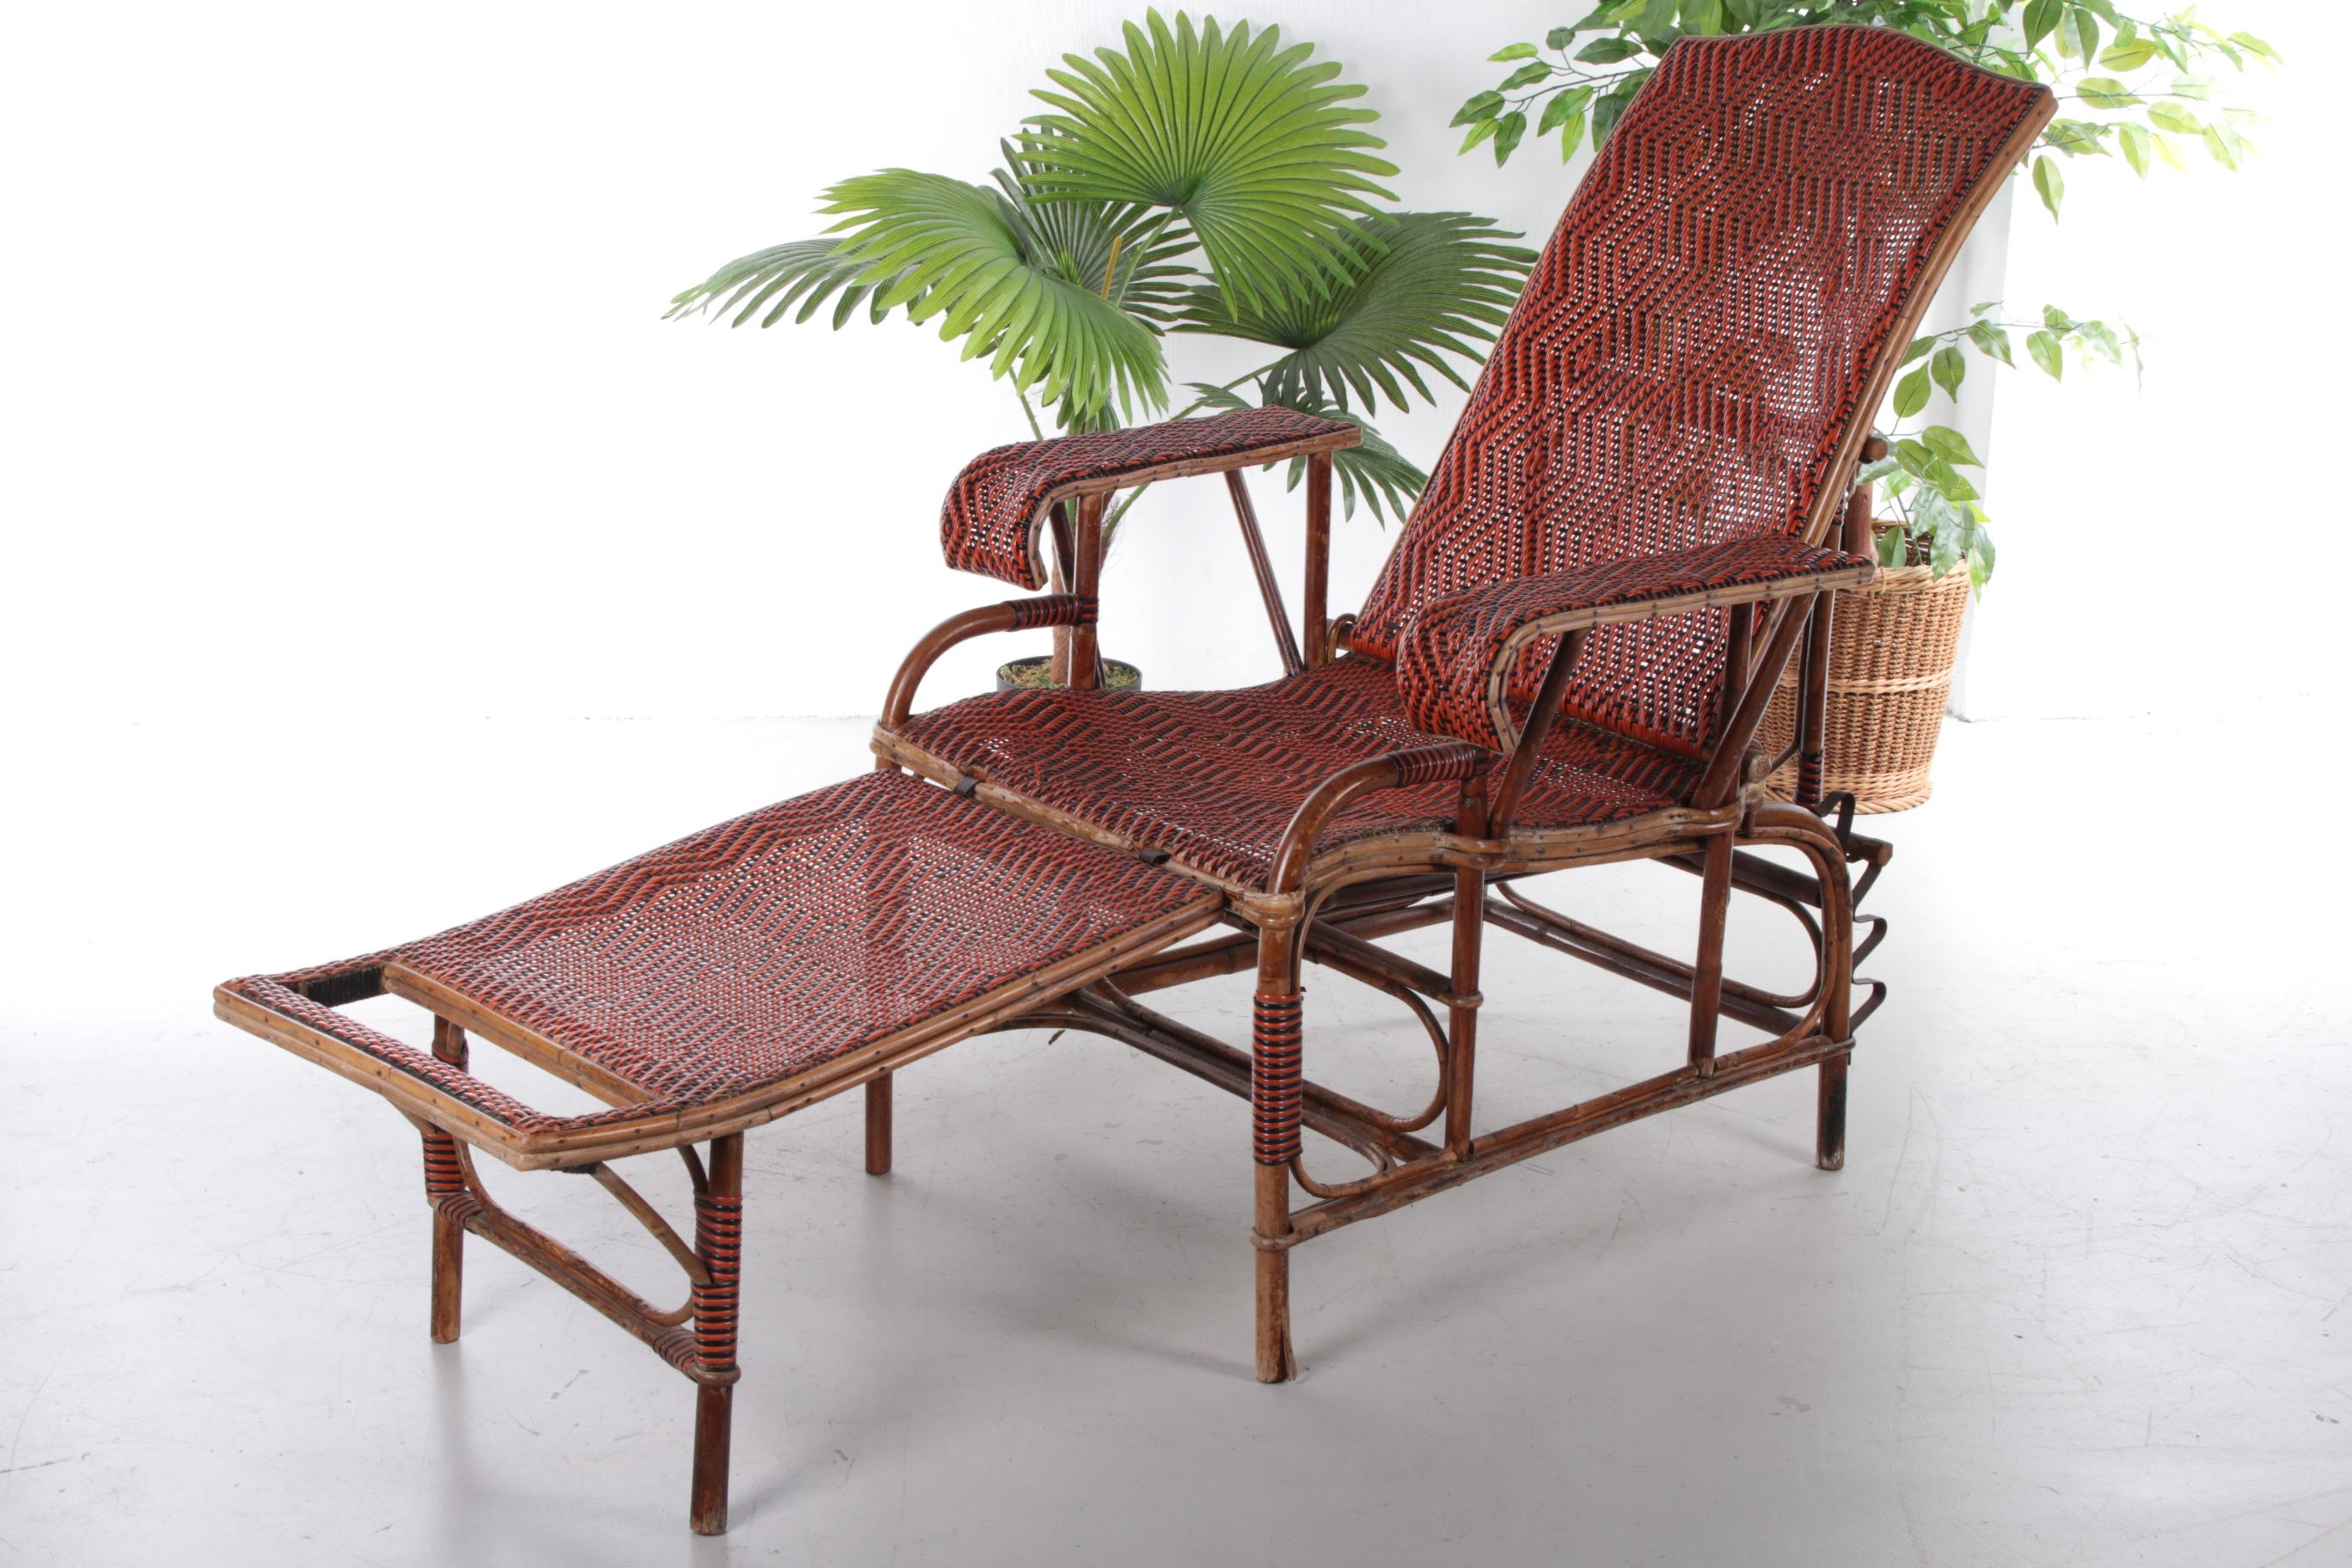 Vintage rattan and bamboo lounge chair, 1960s


Imagine being transported back in time for a moment. You are a lucky passenger on a spectacular steamship journey bound for Europe. As you stroll the boardwalk from the top deck, enjoying the warmth